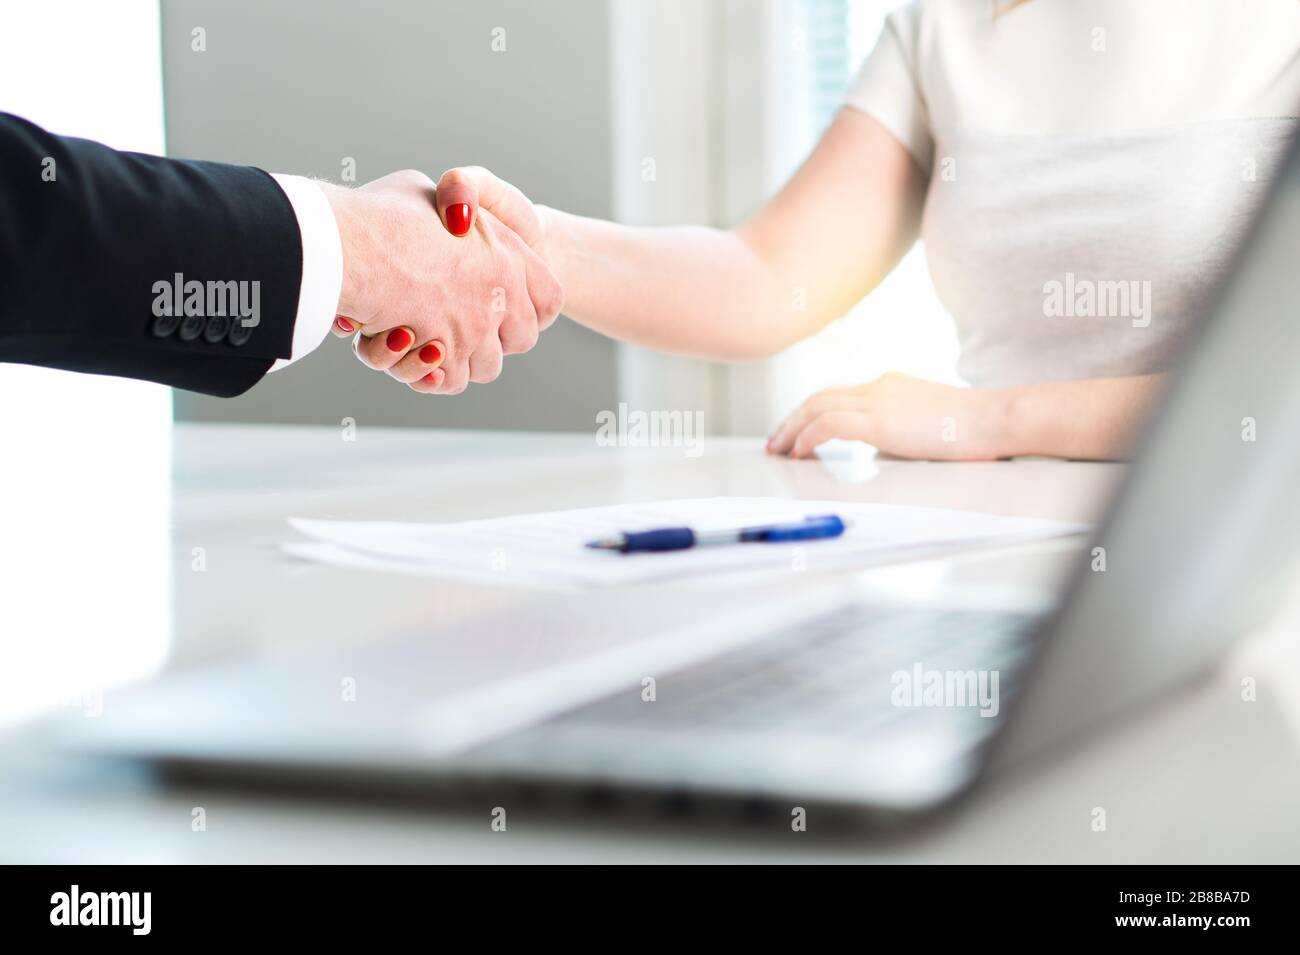 Business man and woman shaking hands after successful job interview or meeting. Young applicant making contract of employment. Stock Photo